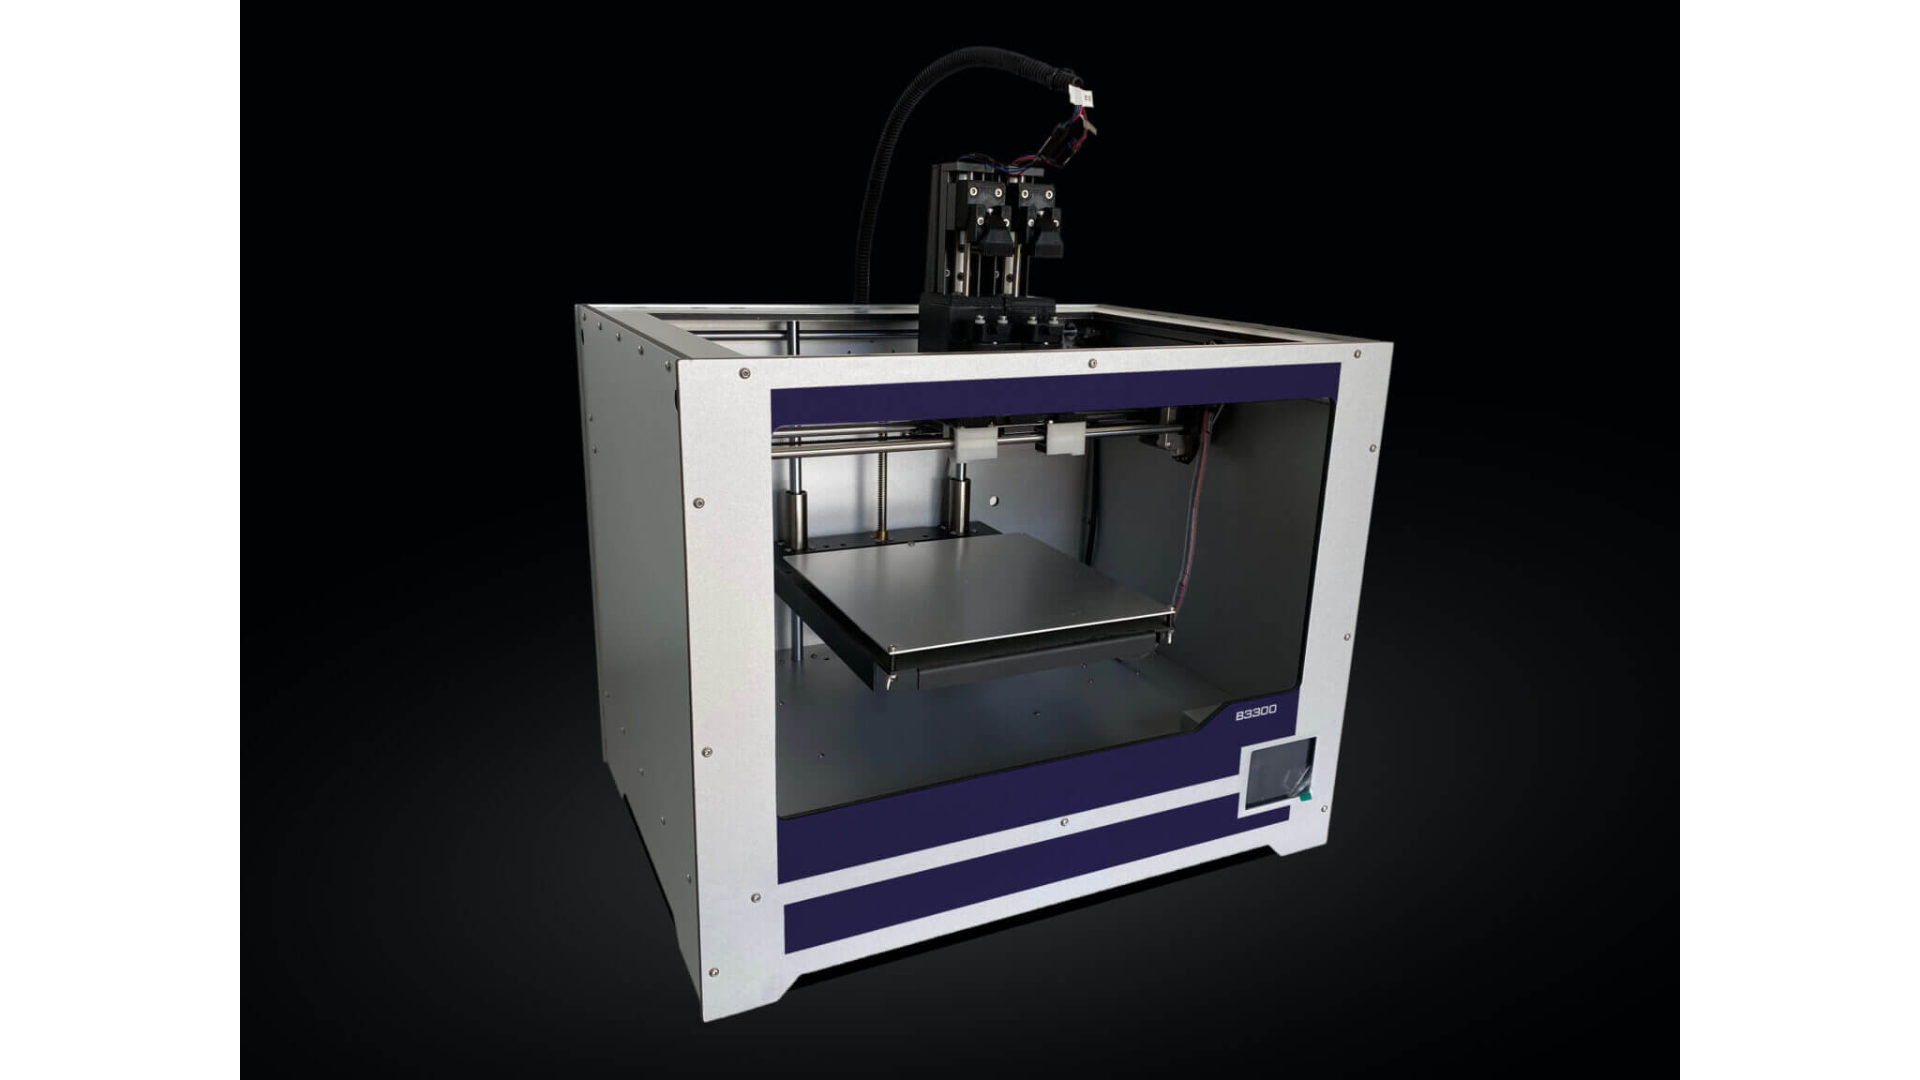 nano3Dprint announced the launch of its B3300 Dual-Dispensing 3D Printer to produce 3D printed electronics; functional electronics with embedded circuitry